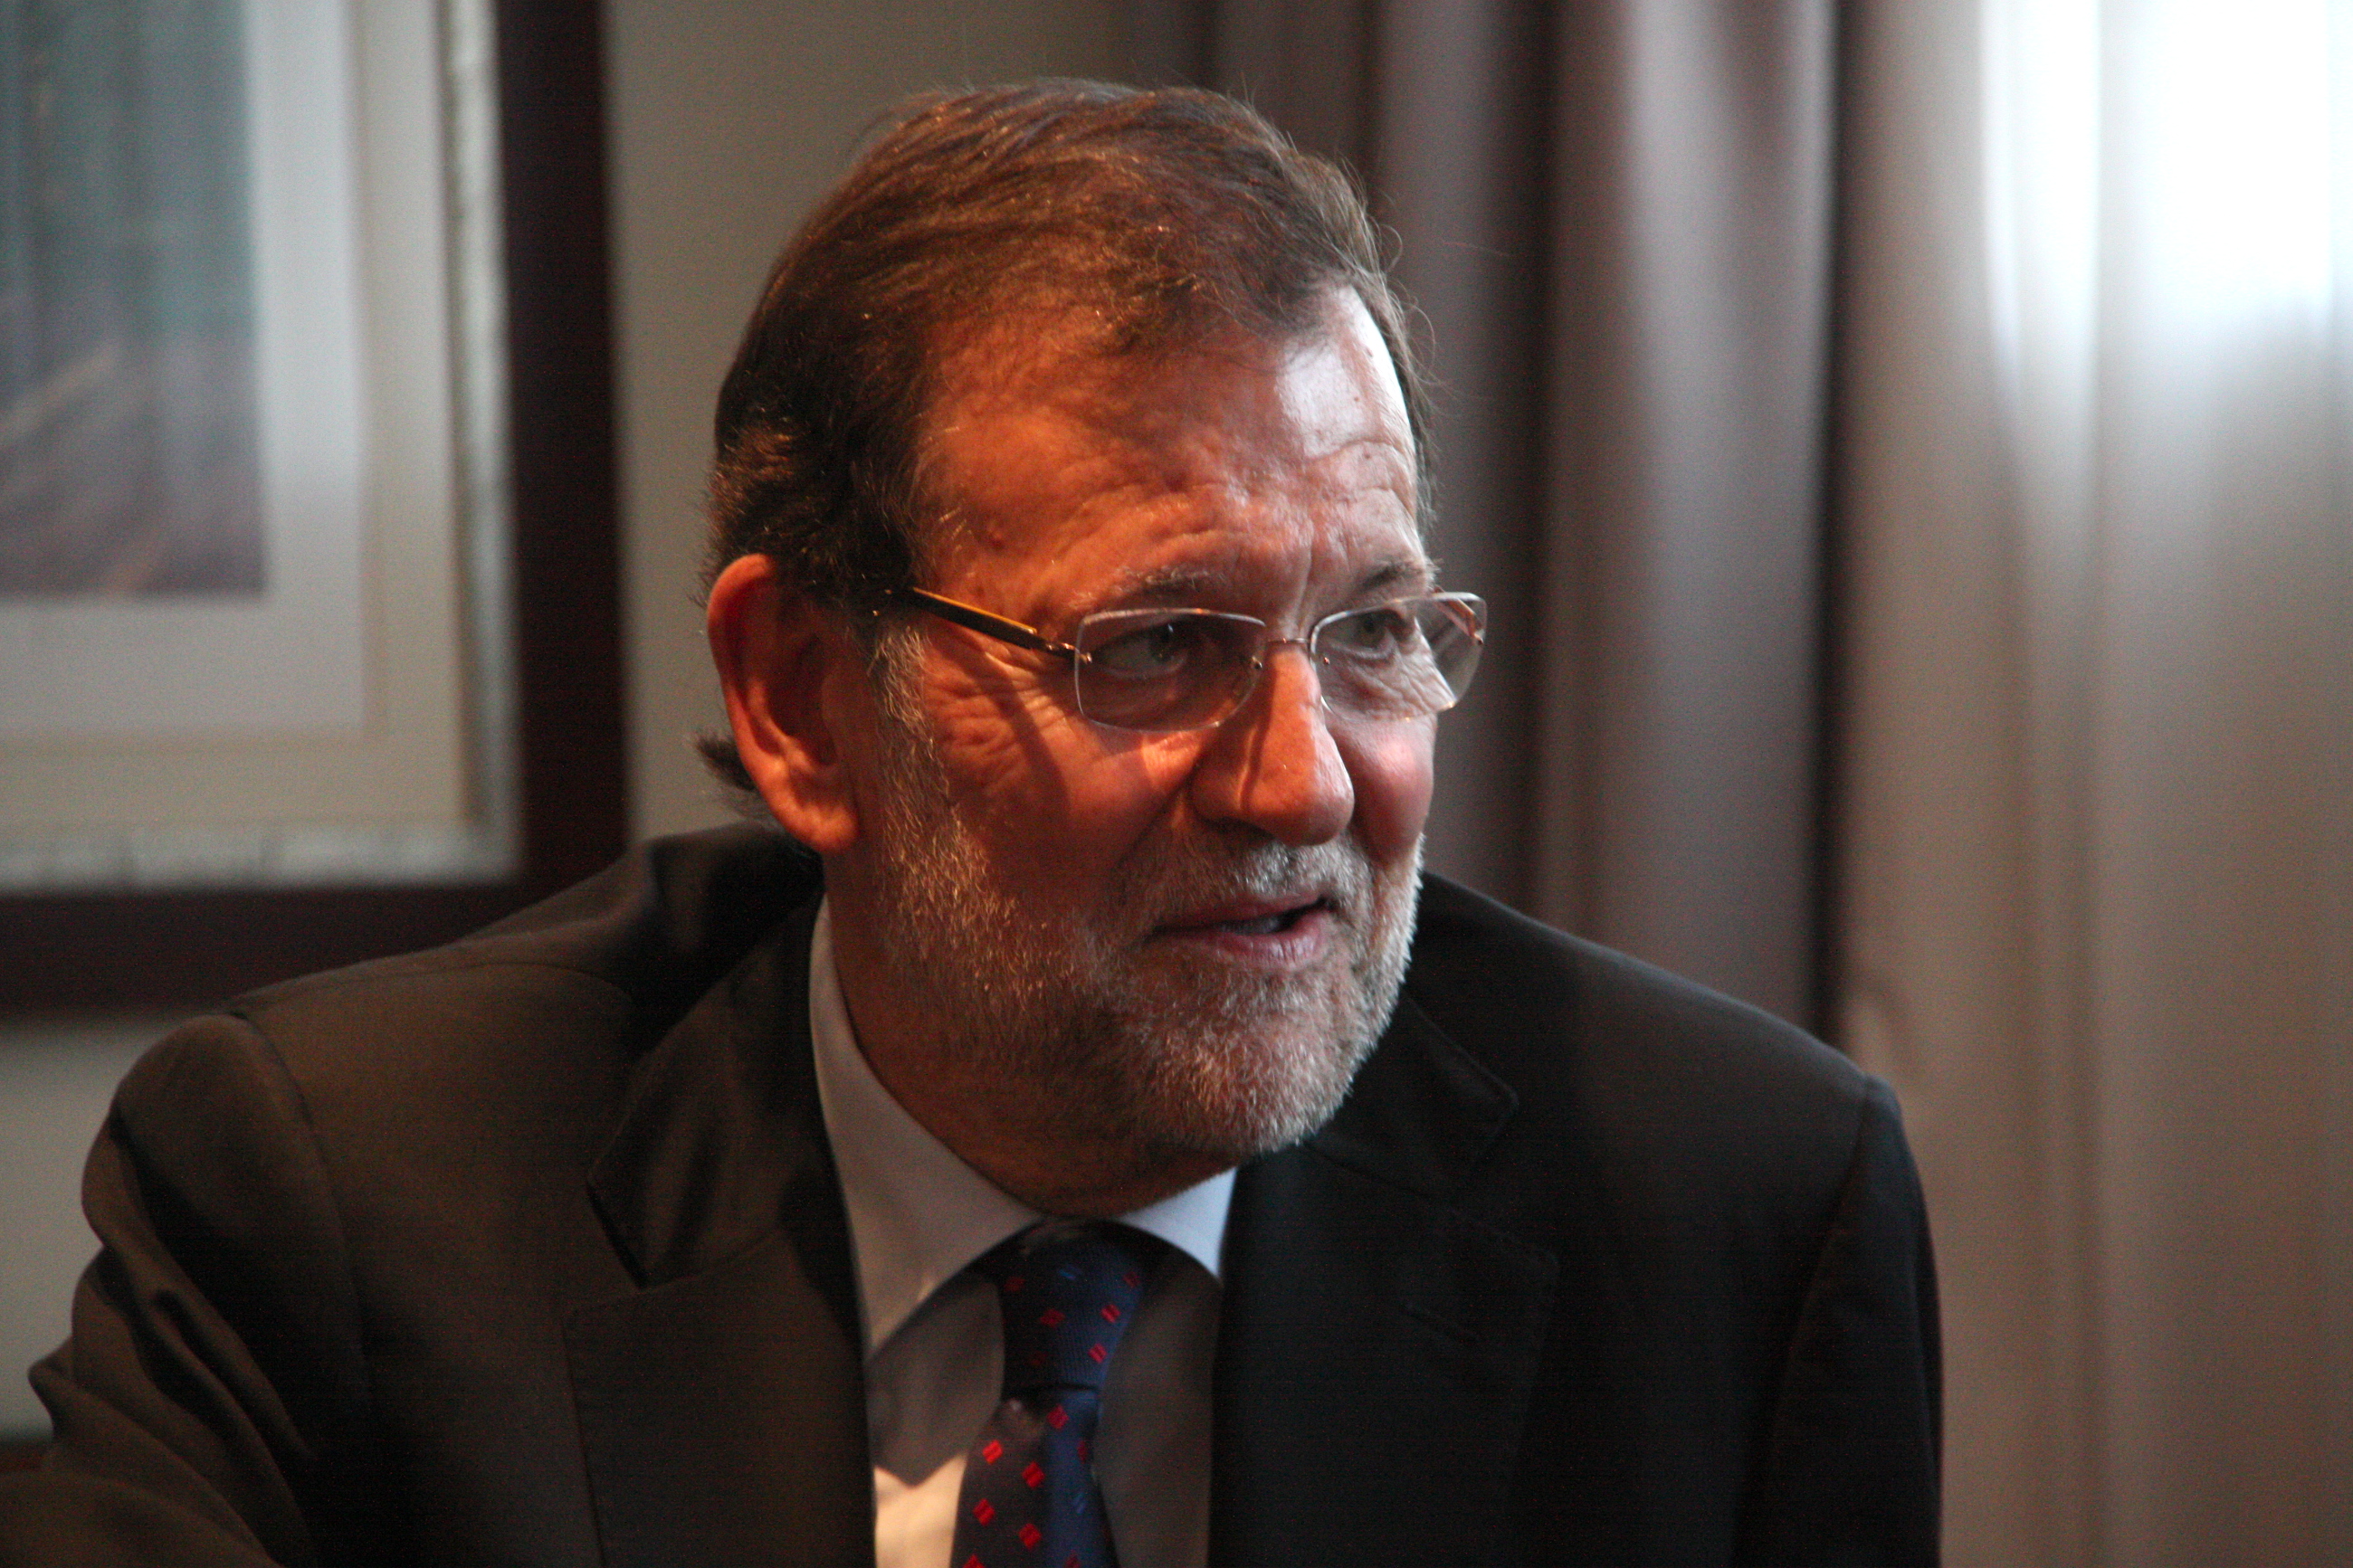 Spanish Prime Minister, Mariano Rajoy (by ACN)